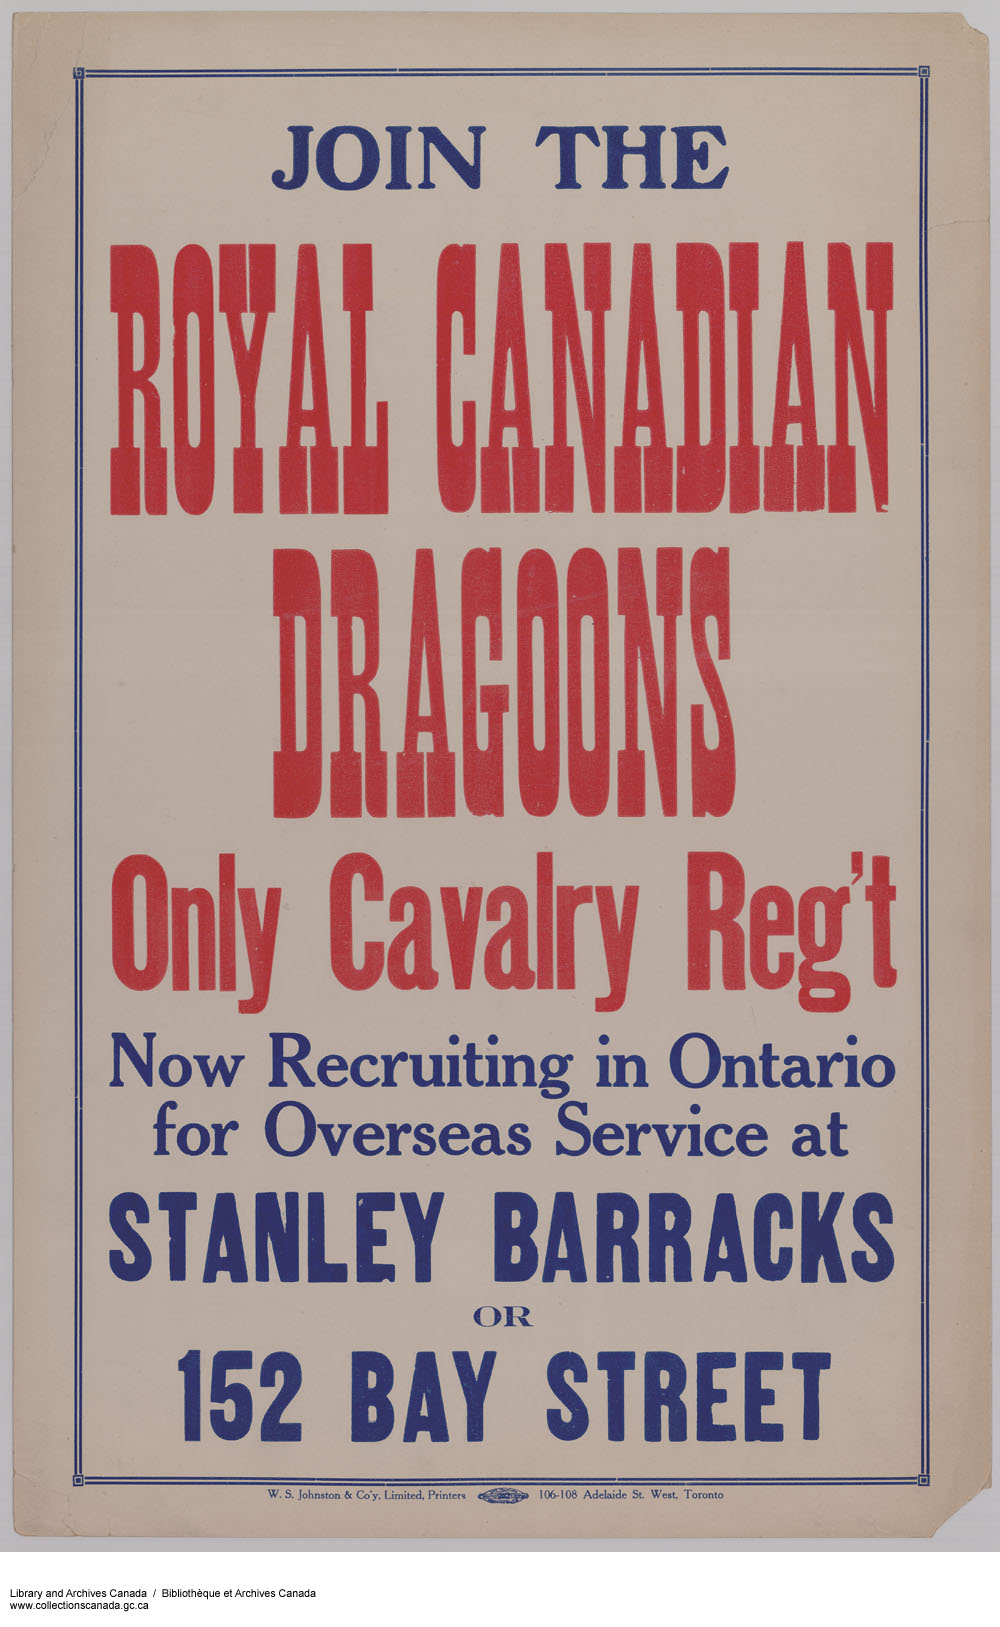 Dragoons Recruiting Poster, WWI